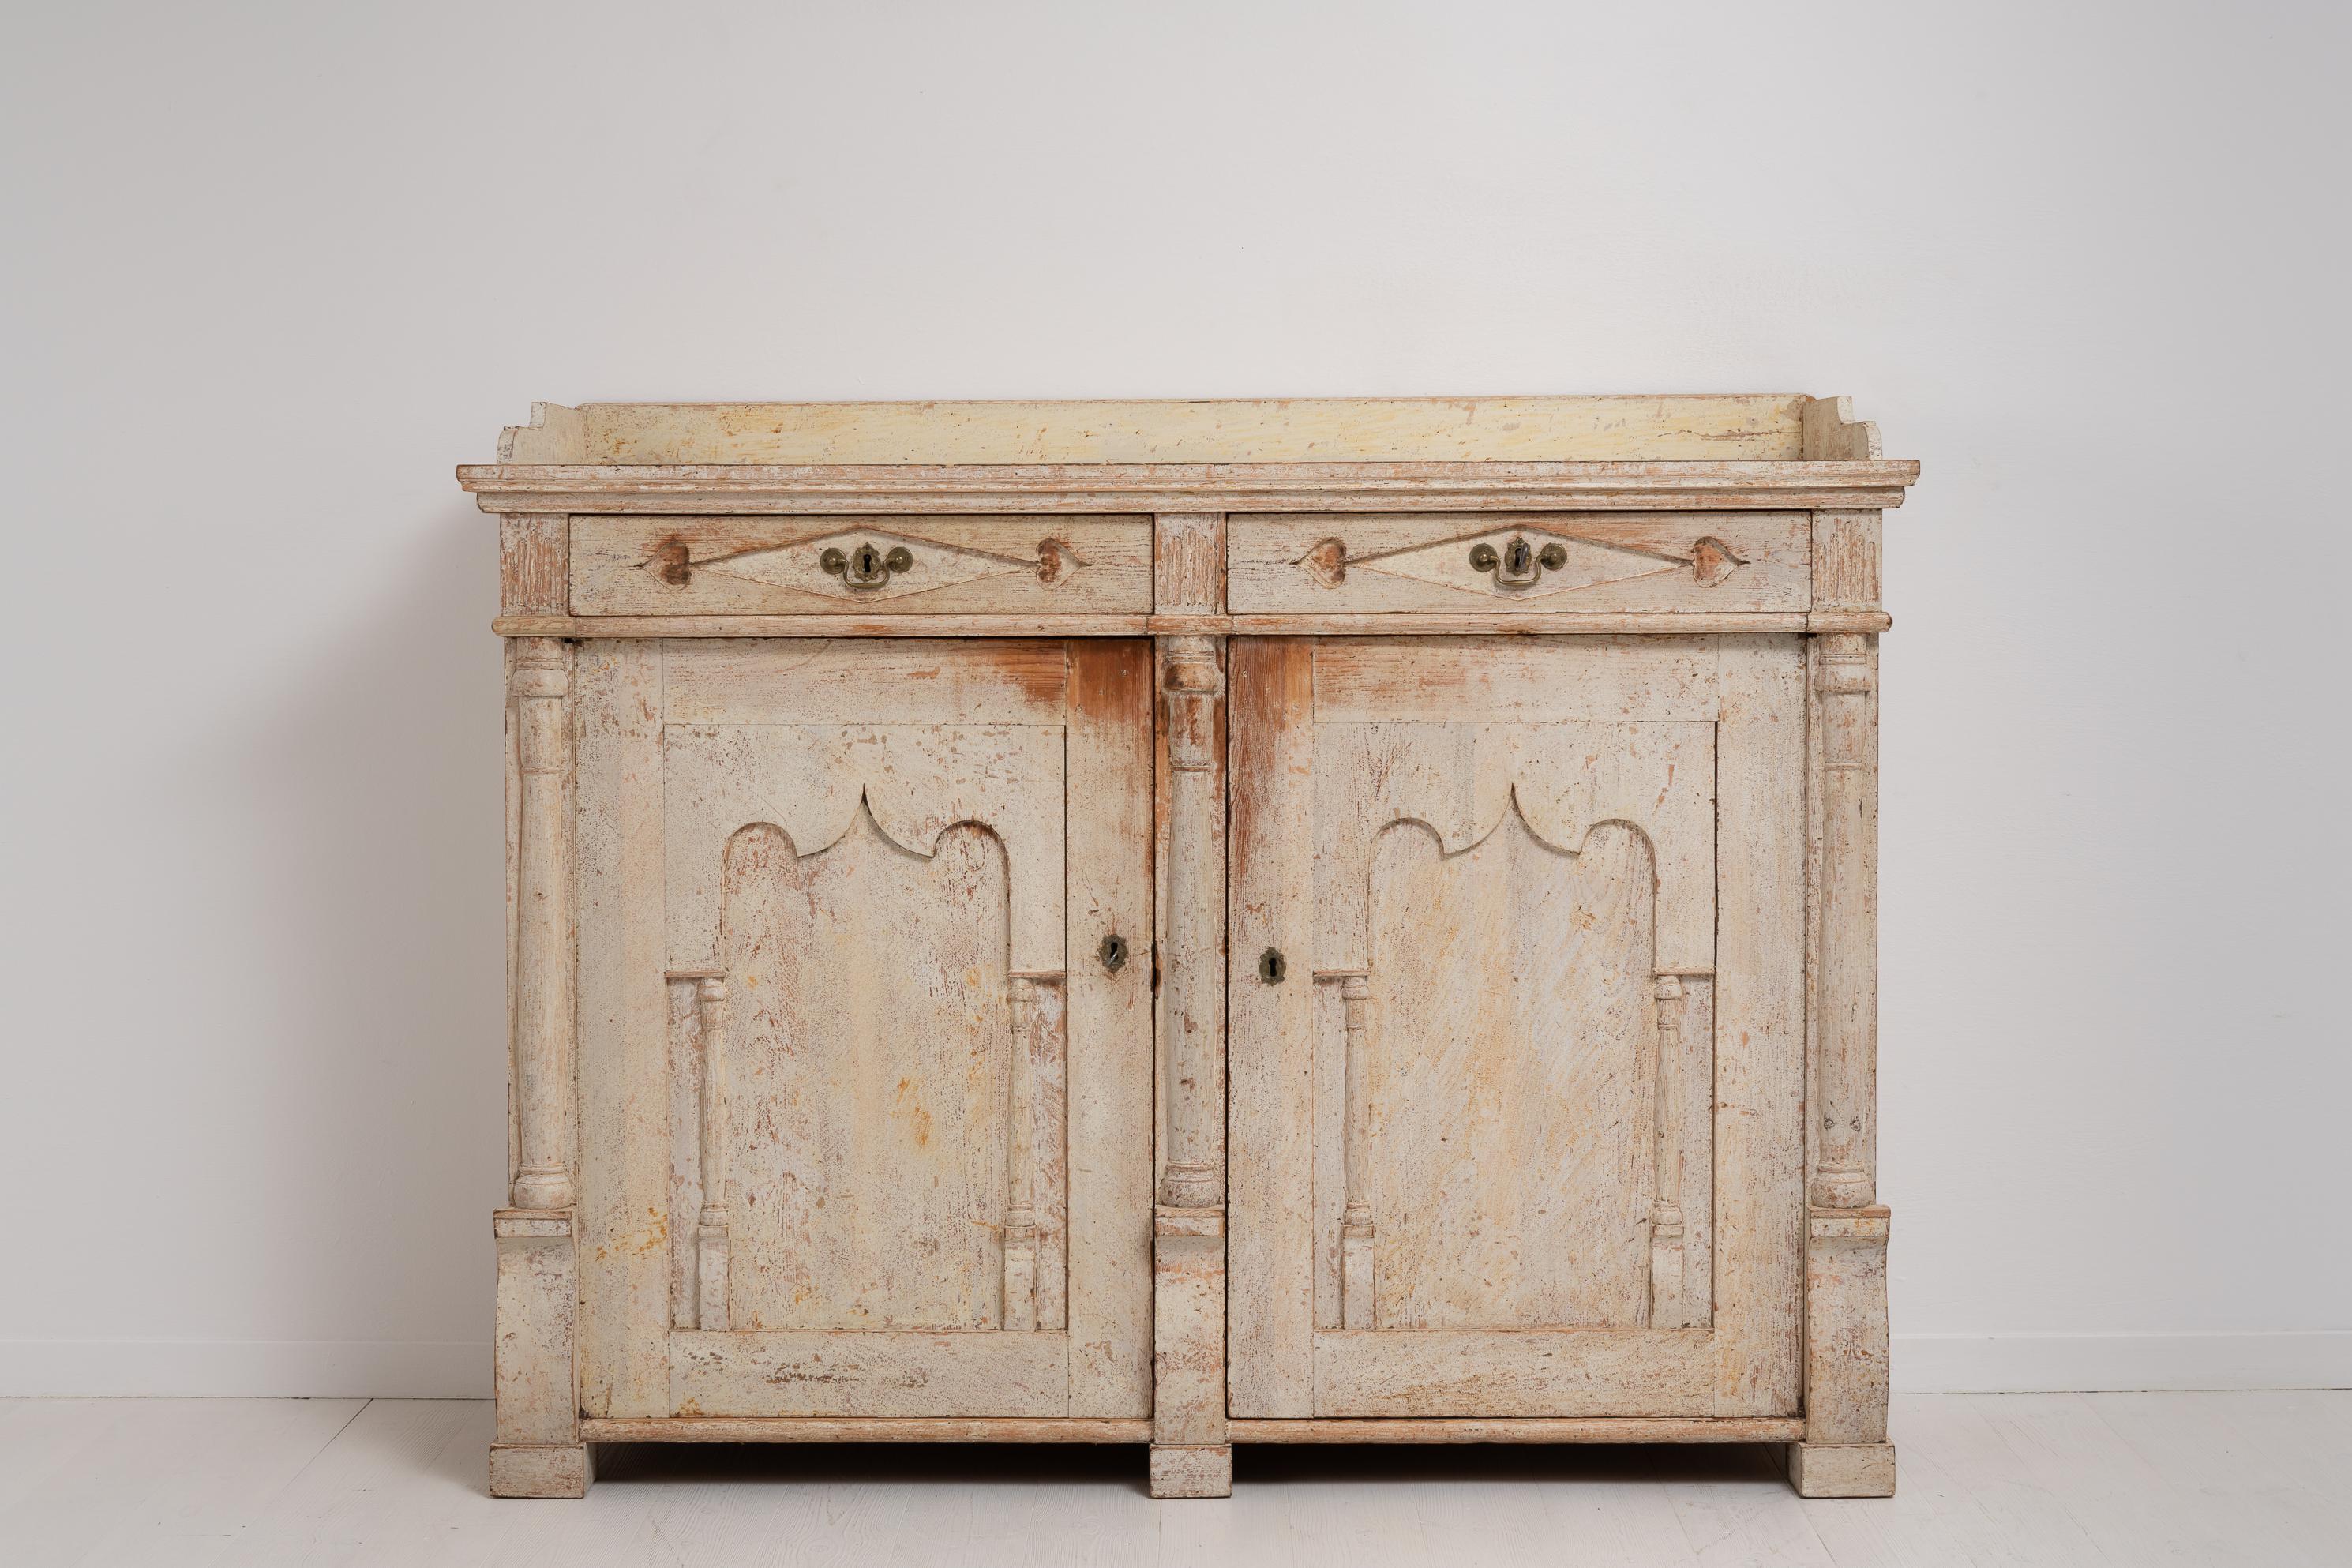 Northern Swedish sideboard from the transitional period between the gustavian and empire era. This unusual sideboard is from around 1820 to 1830. Painted pine dry scraped by hand to the original cream paint with the distress and patina of time.